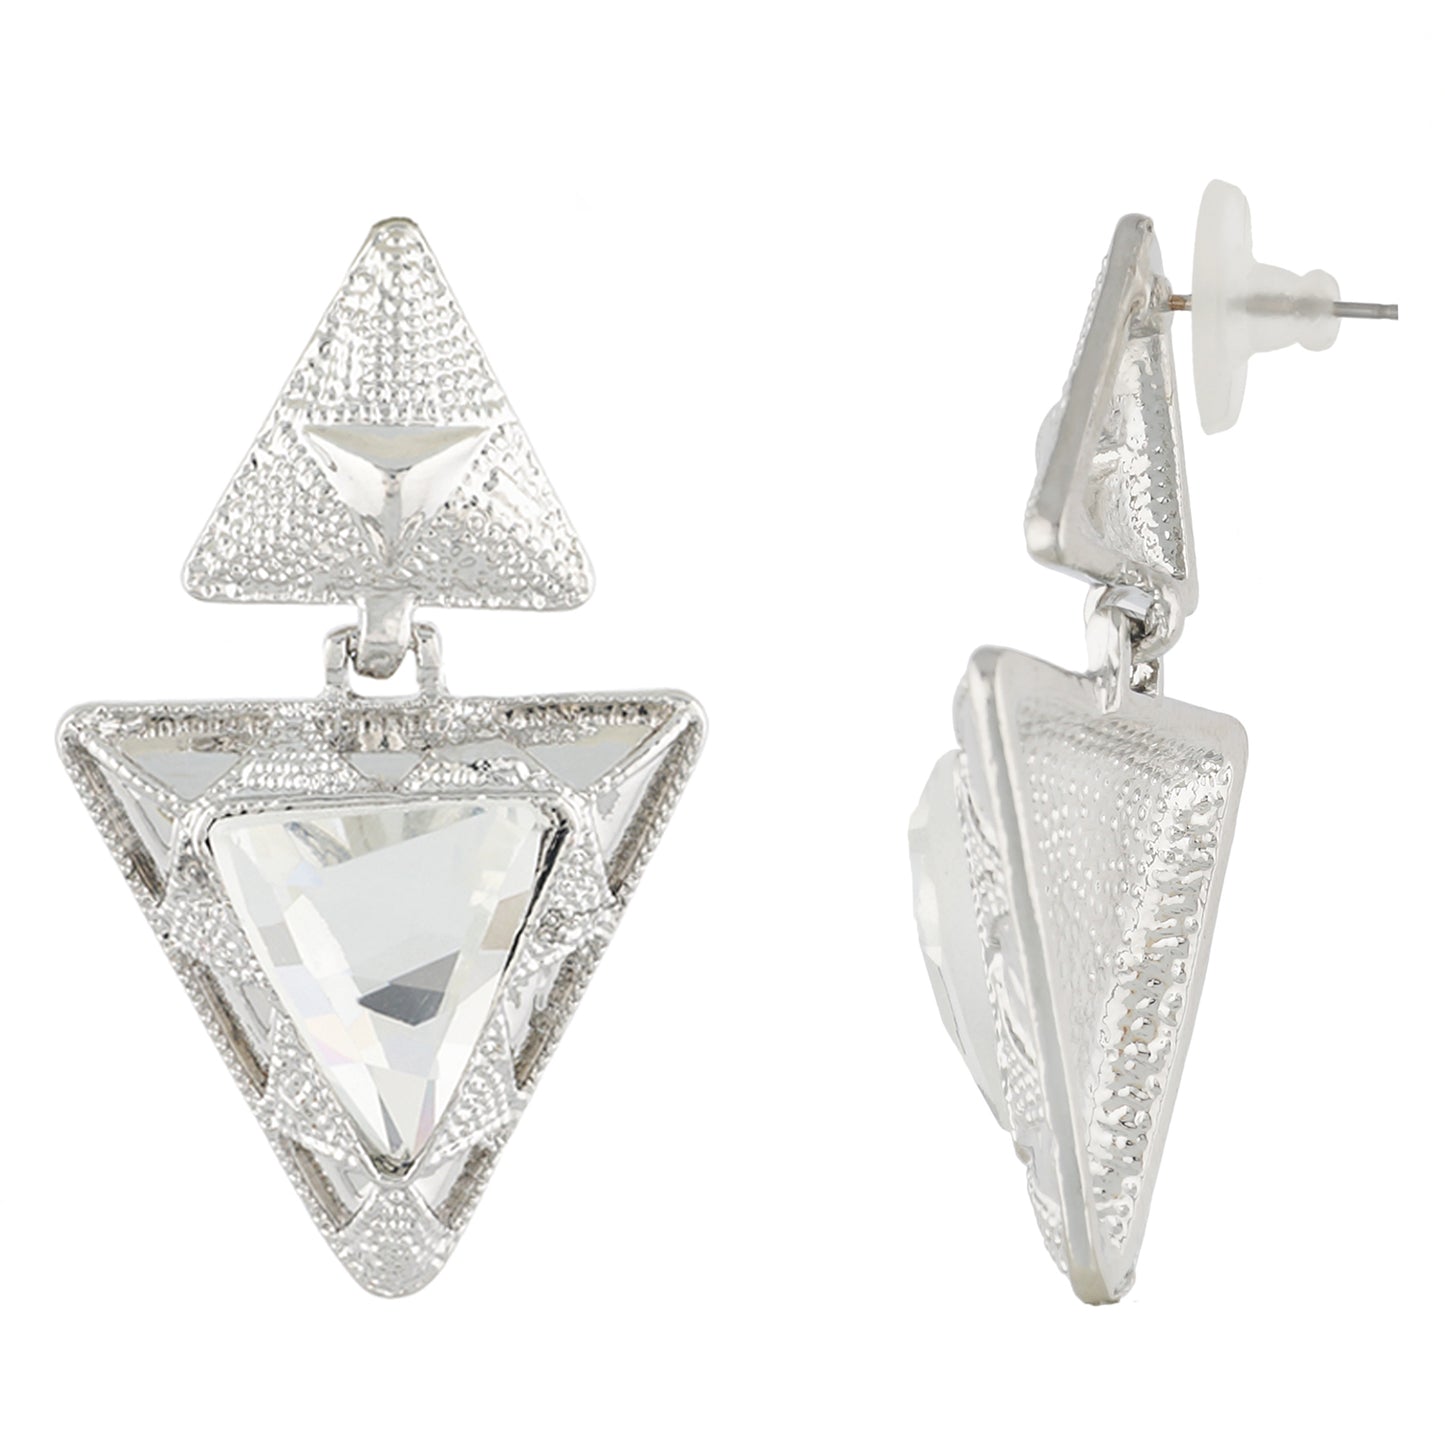 White Colour Triangular Necklace and Earrings for Girls and Women